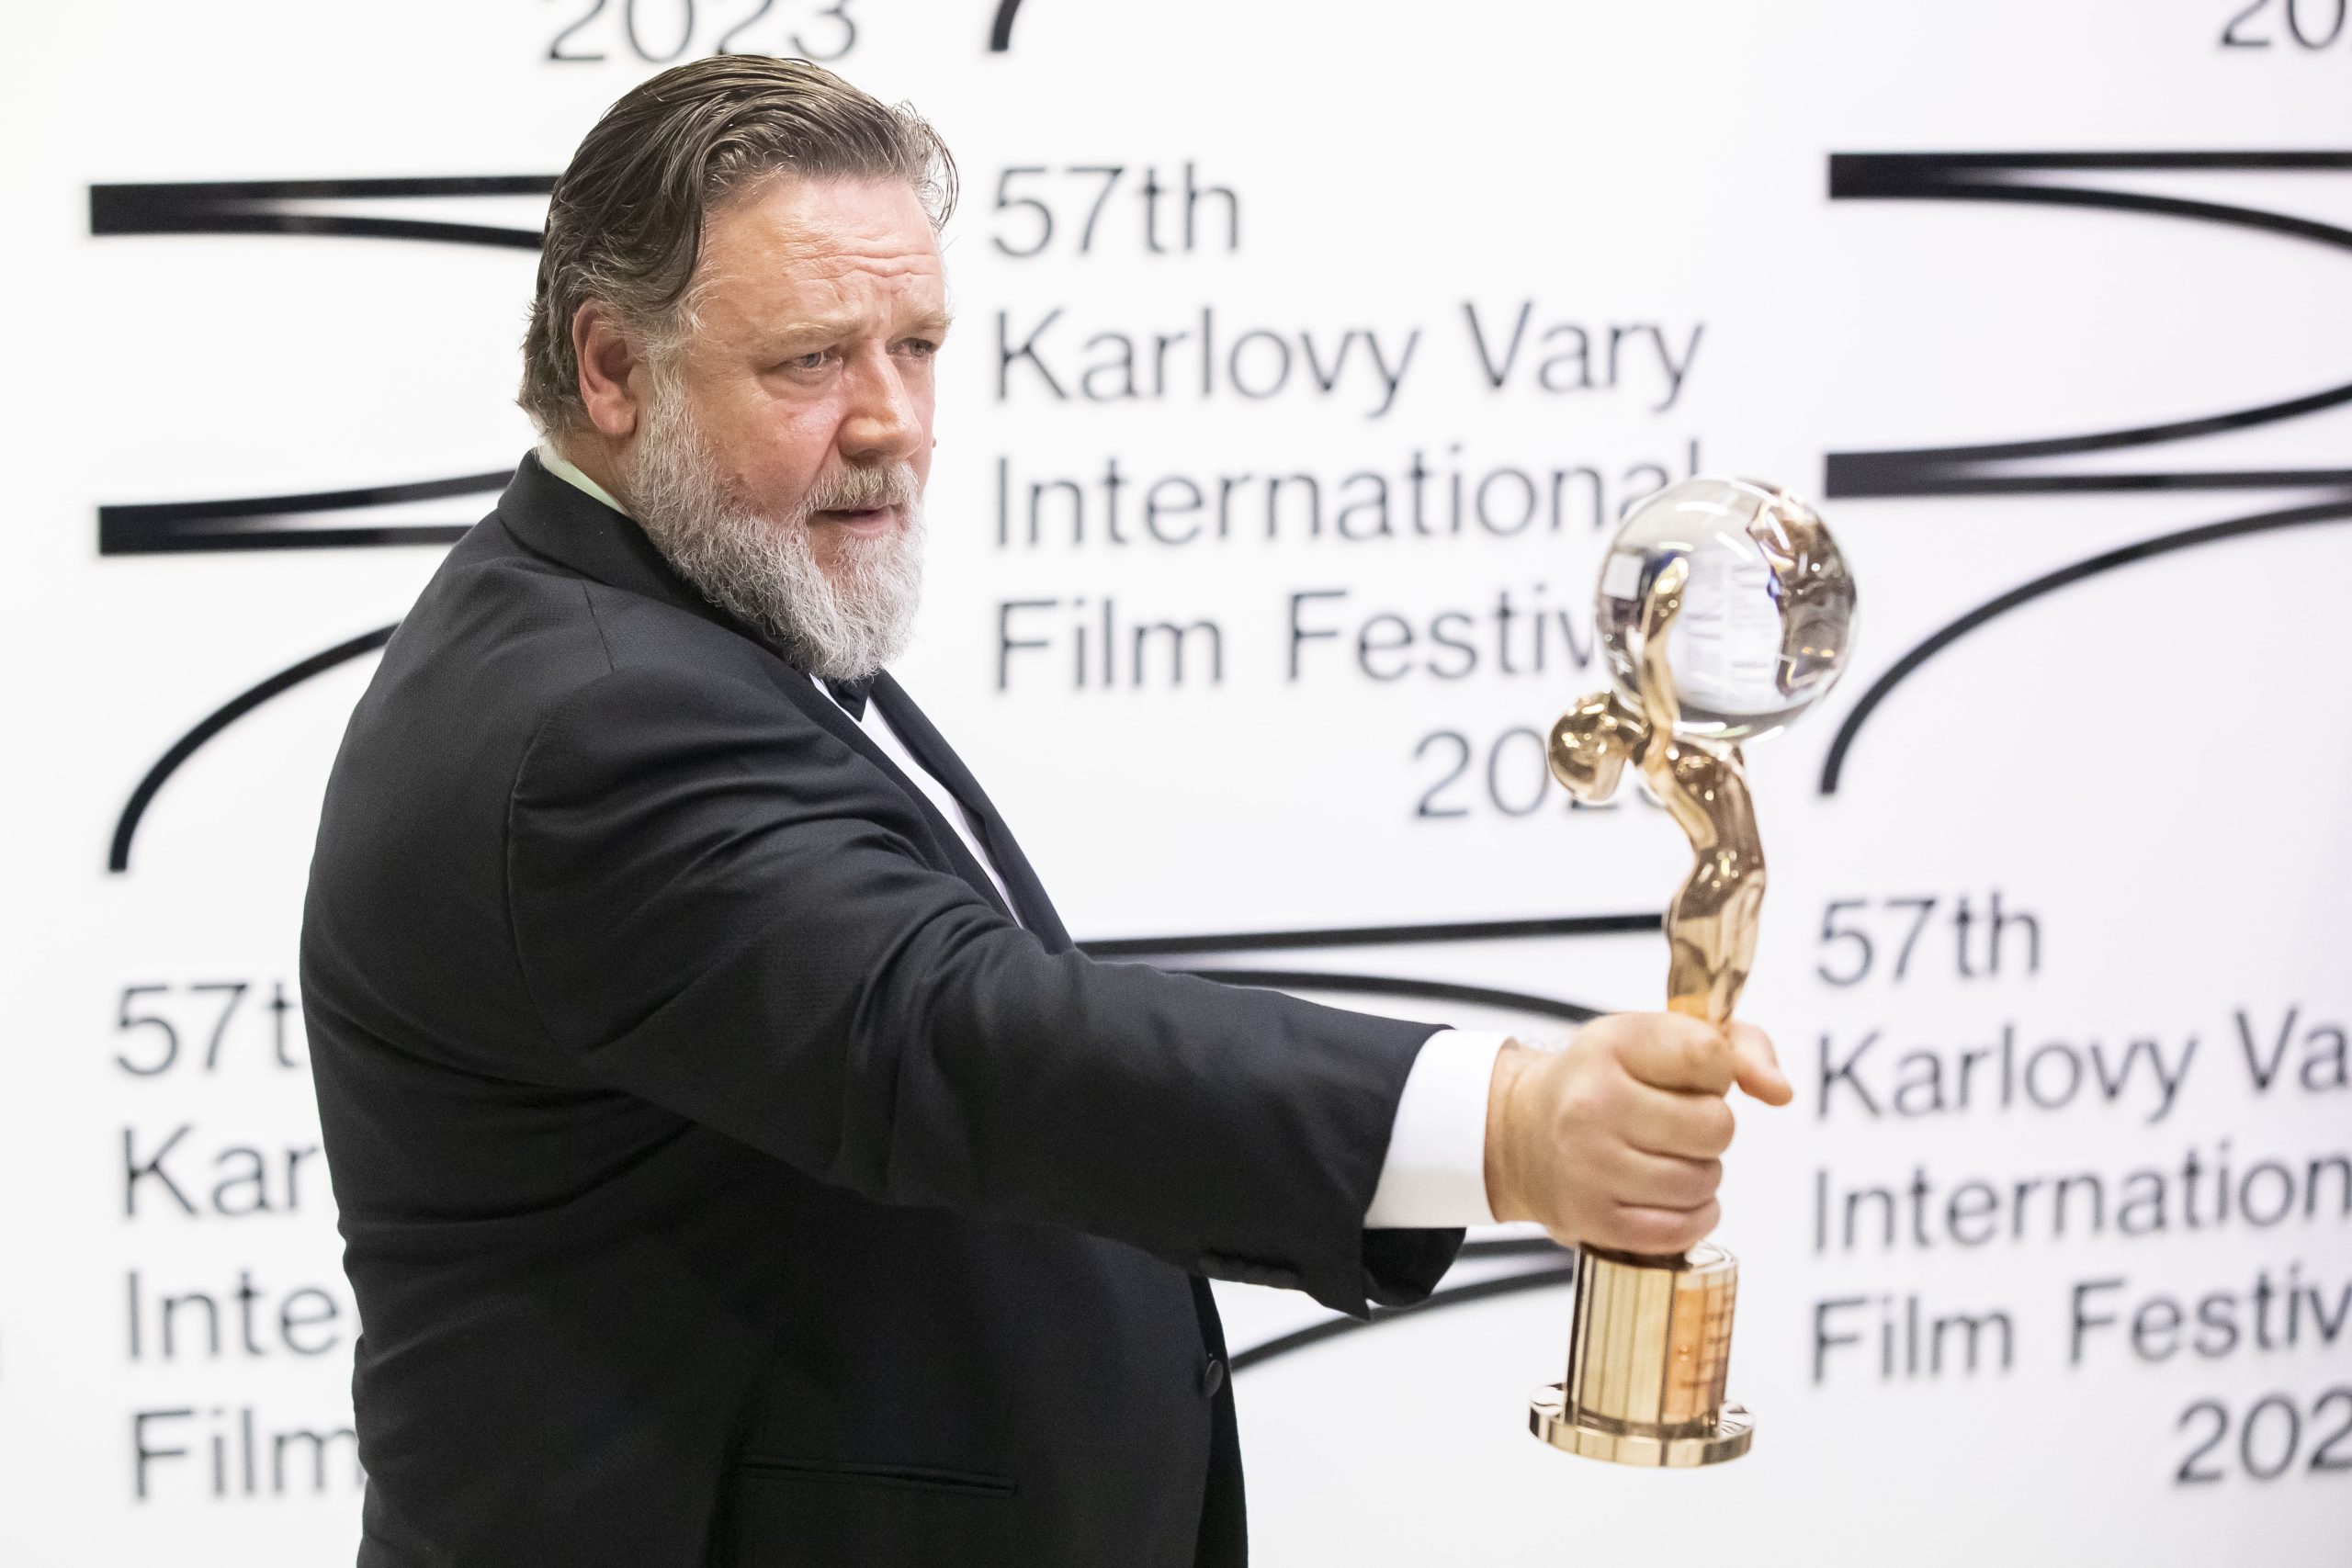 Actor Russell Crowe holding up his Crystal Globe Award on a red carpet during the 57th Karlovy Vary International Film Festival in Czech Republic.